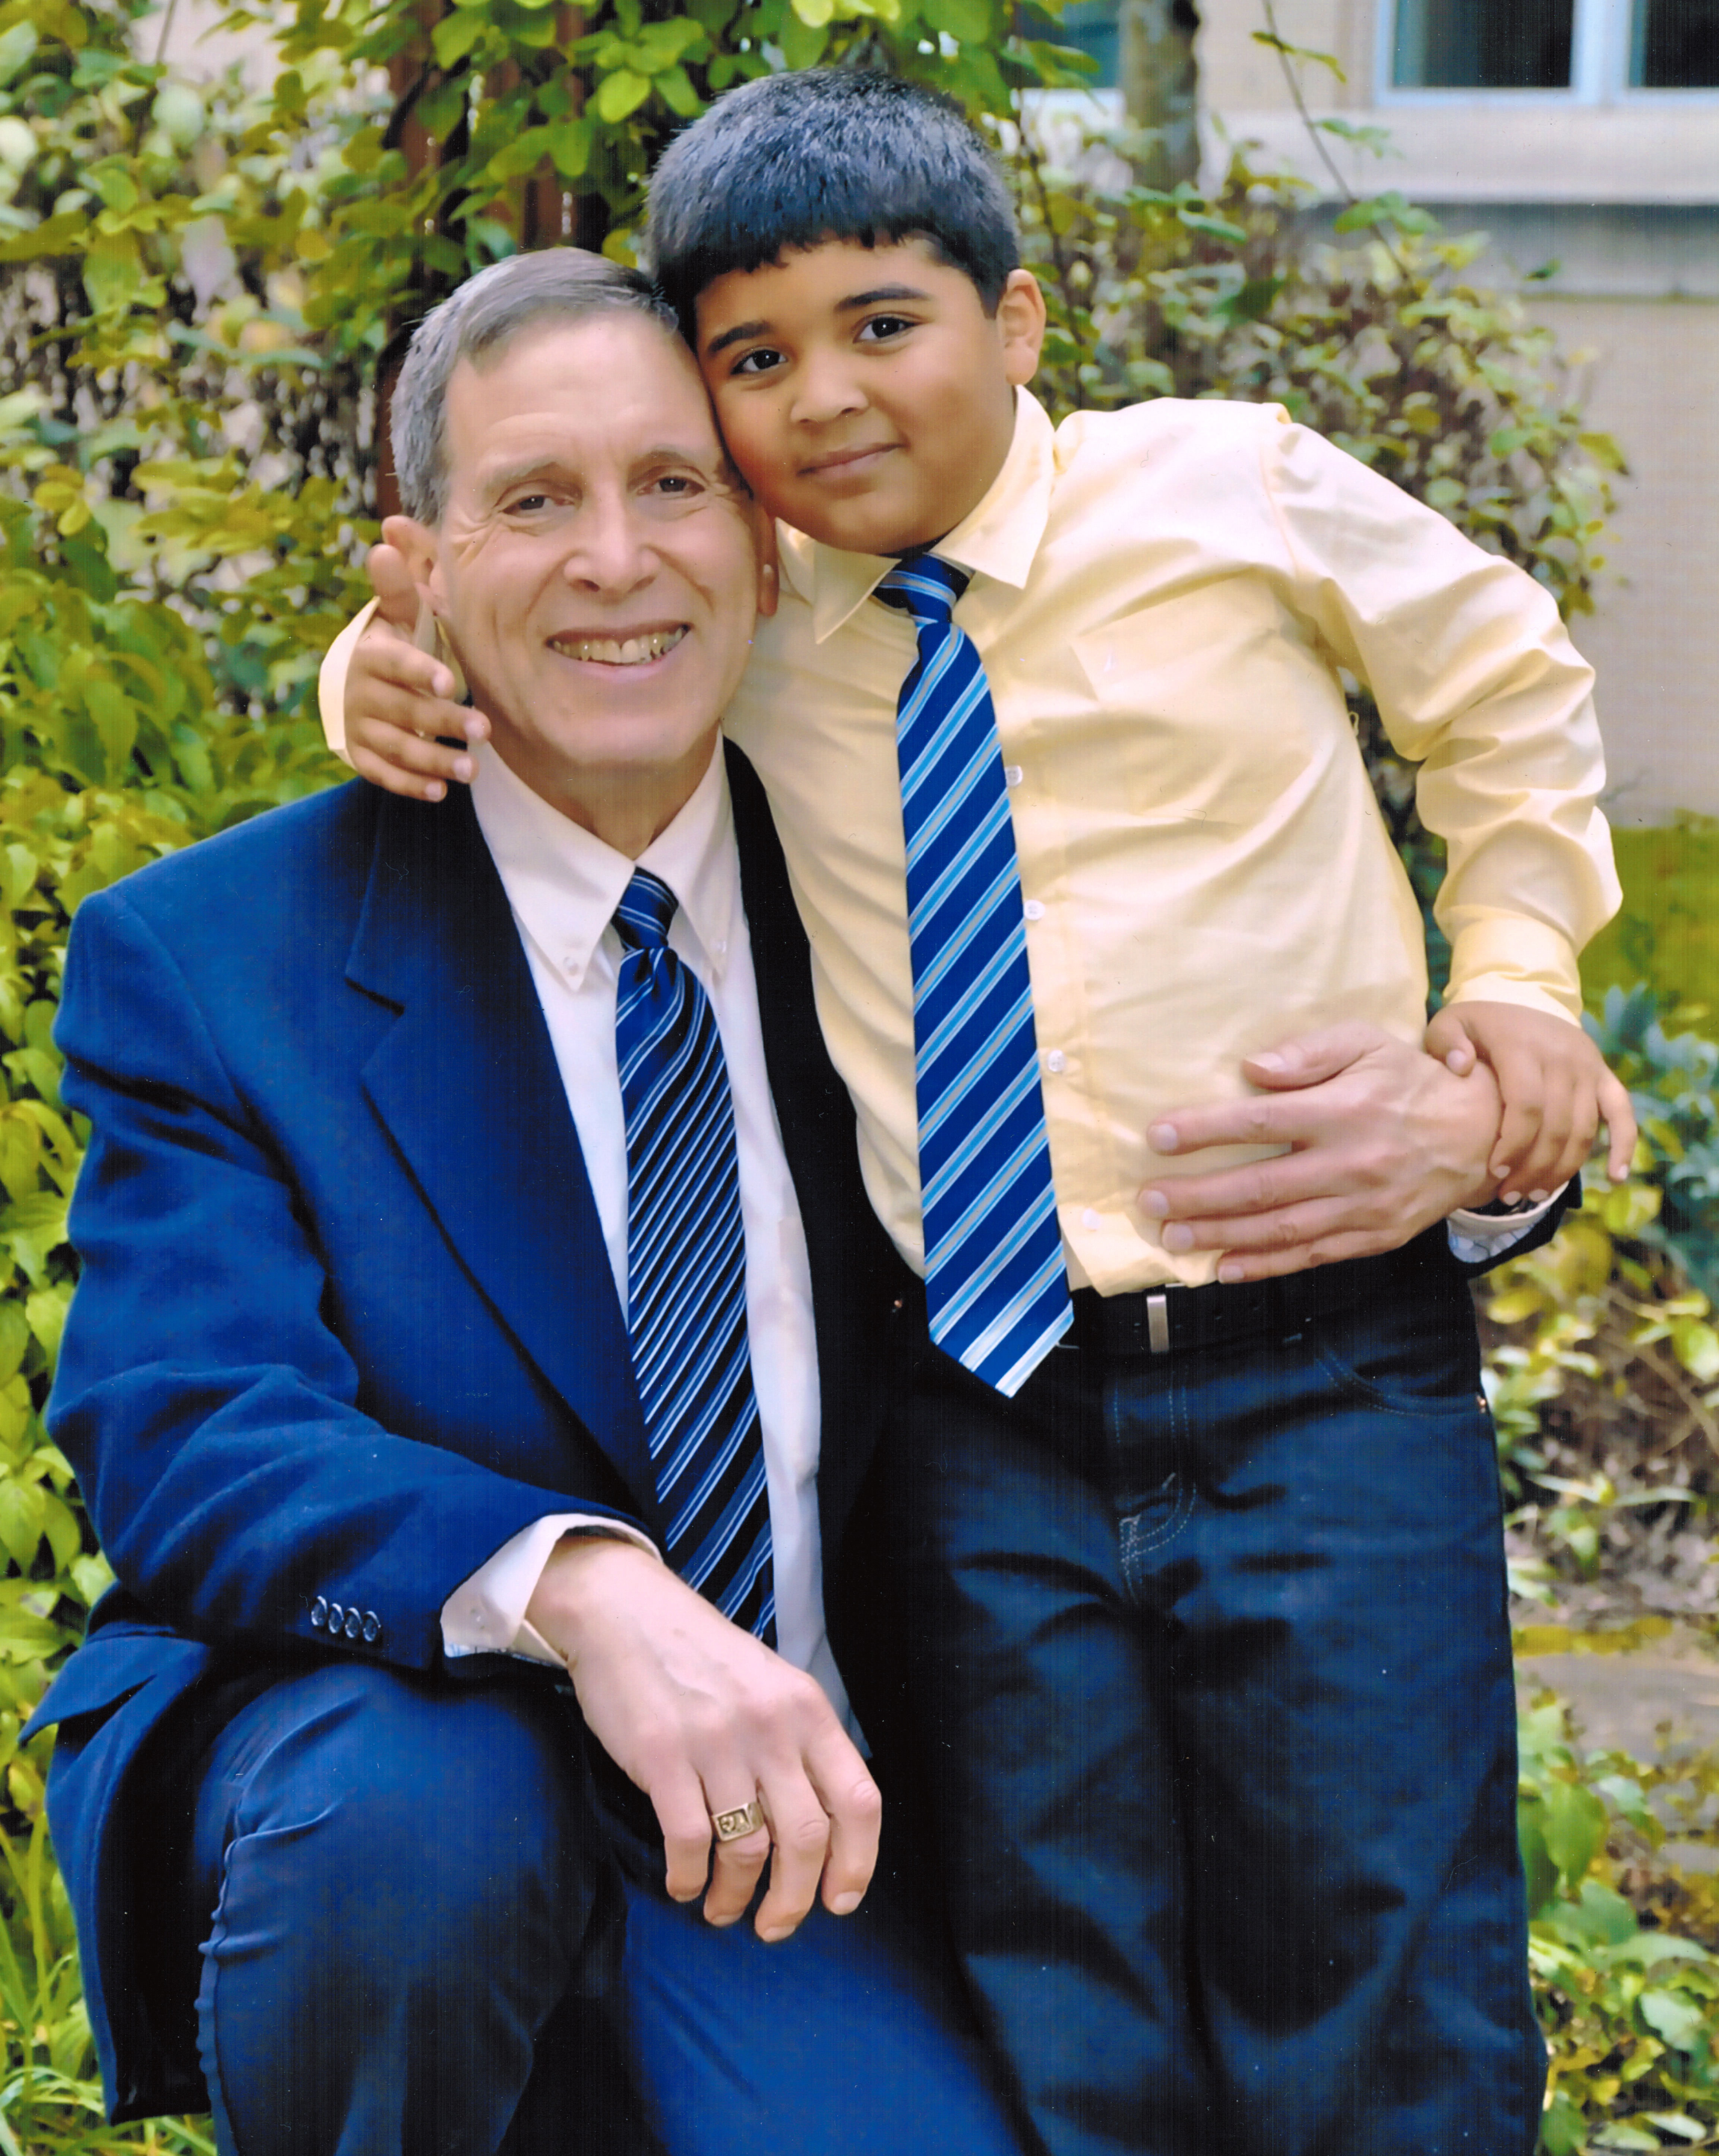 Alan with Ethan at six-years-old outside the King County, WA Courthouse where Alan had just officially become Ethan's father, October, 2011. Alan shares, “It was one of the most joyous days of my life.”